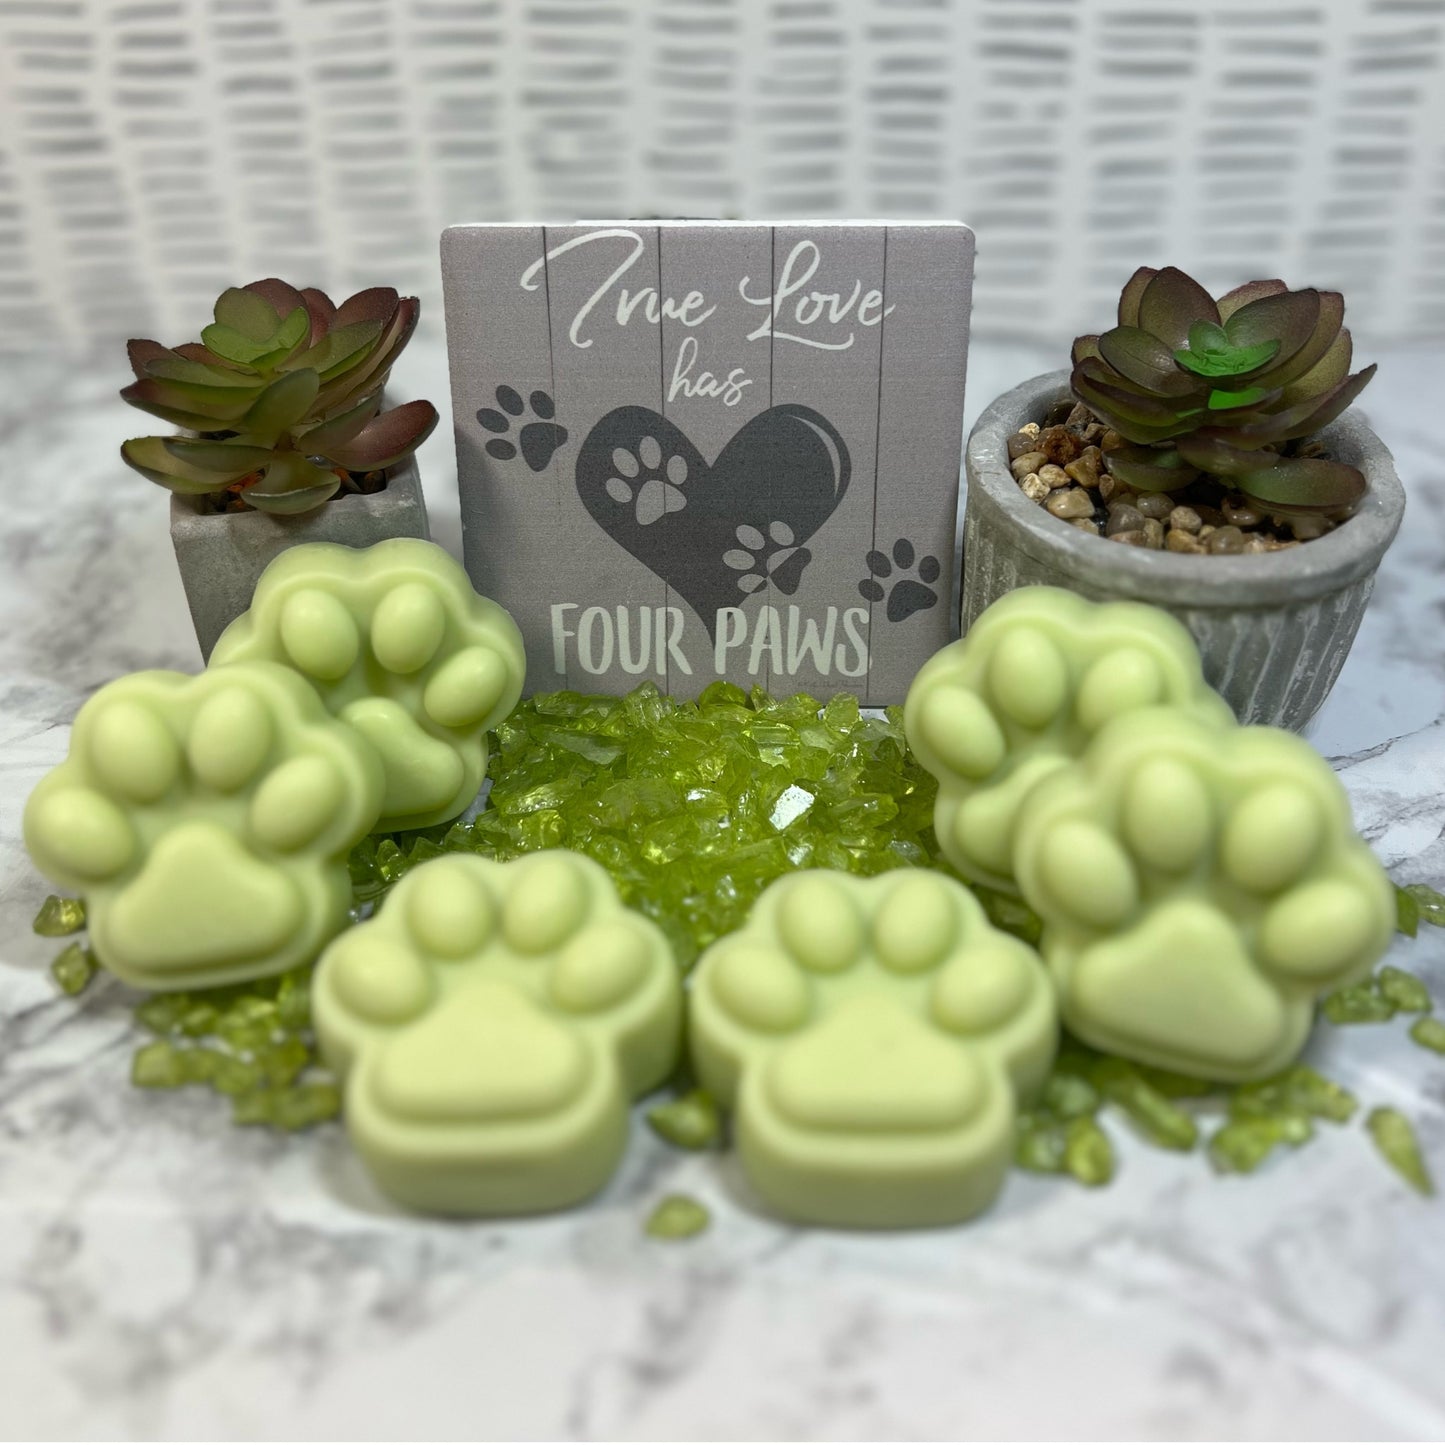 Light green soy Mint Mojito pawprint wax melts, with small plants, green glass beads, and a wooden sign "True love has four Paws" for decor.